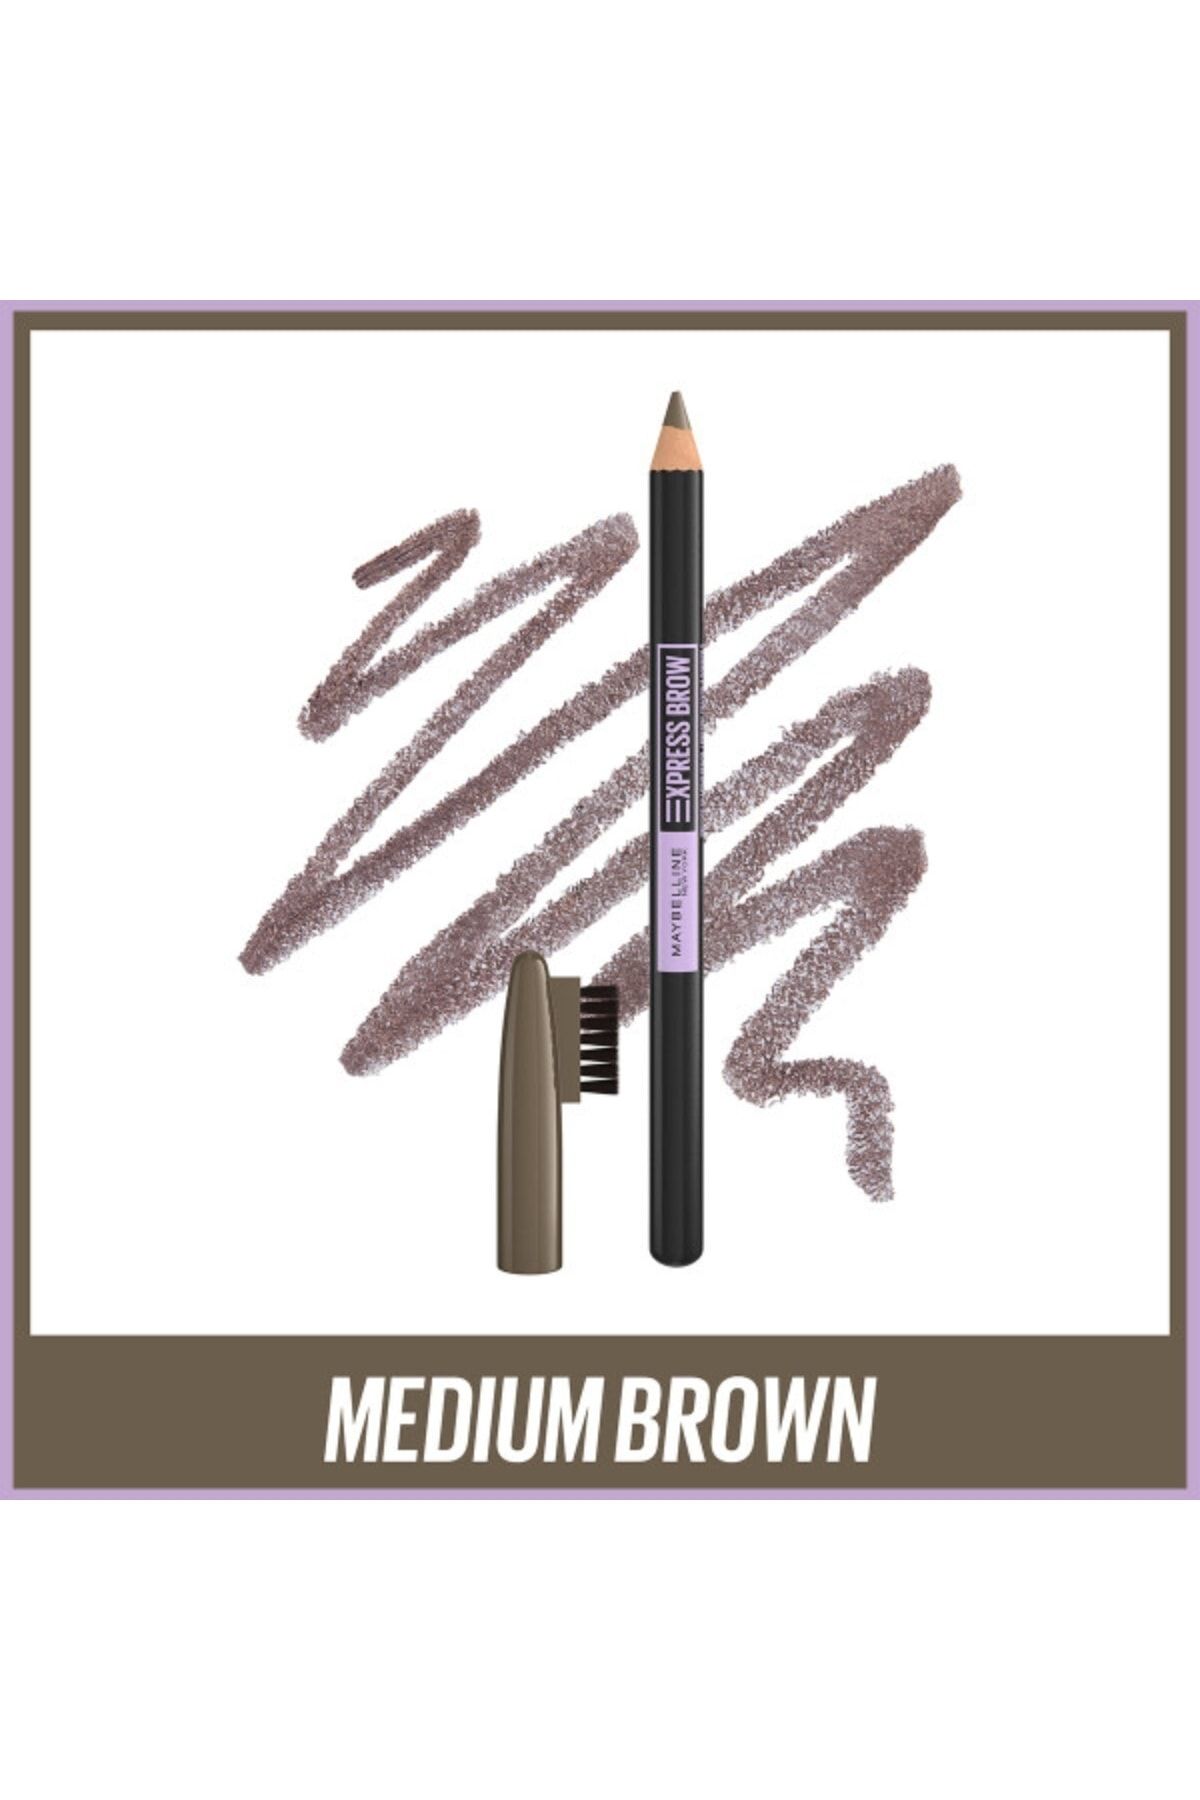 Maybelline New York Express Brow Shaping Pencil - Medium Brown